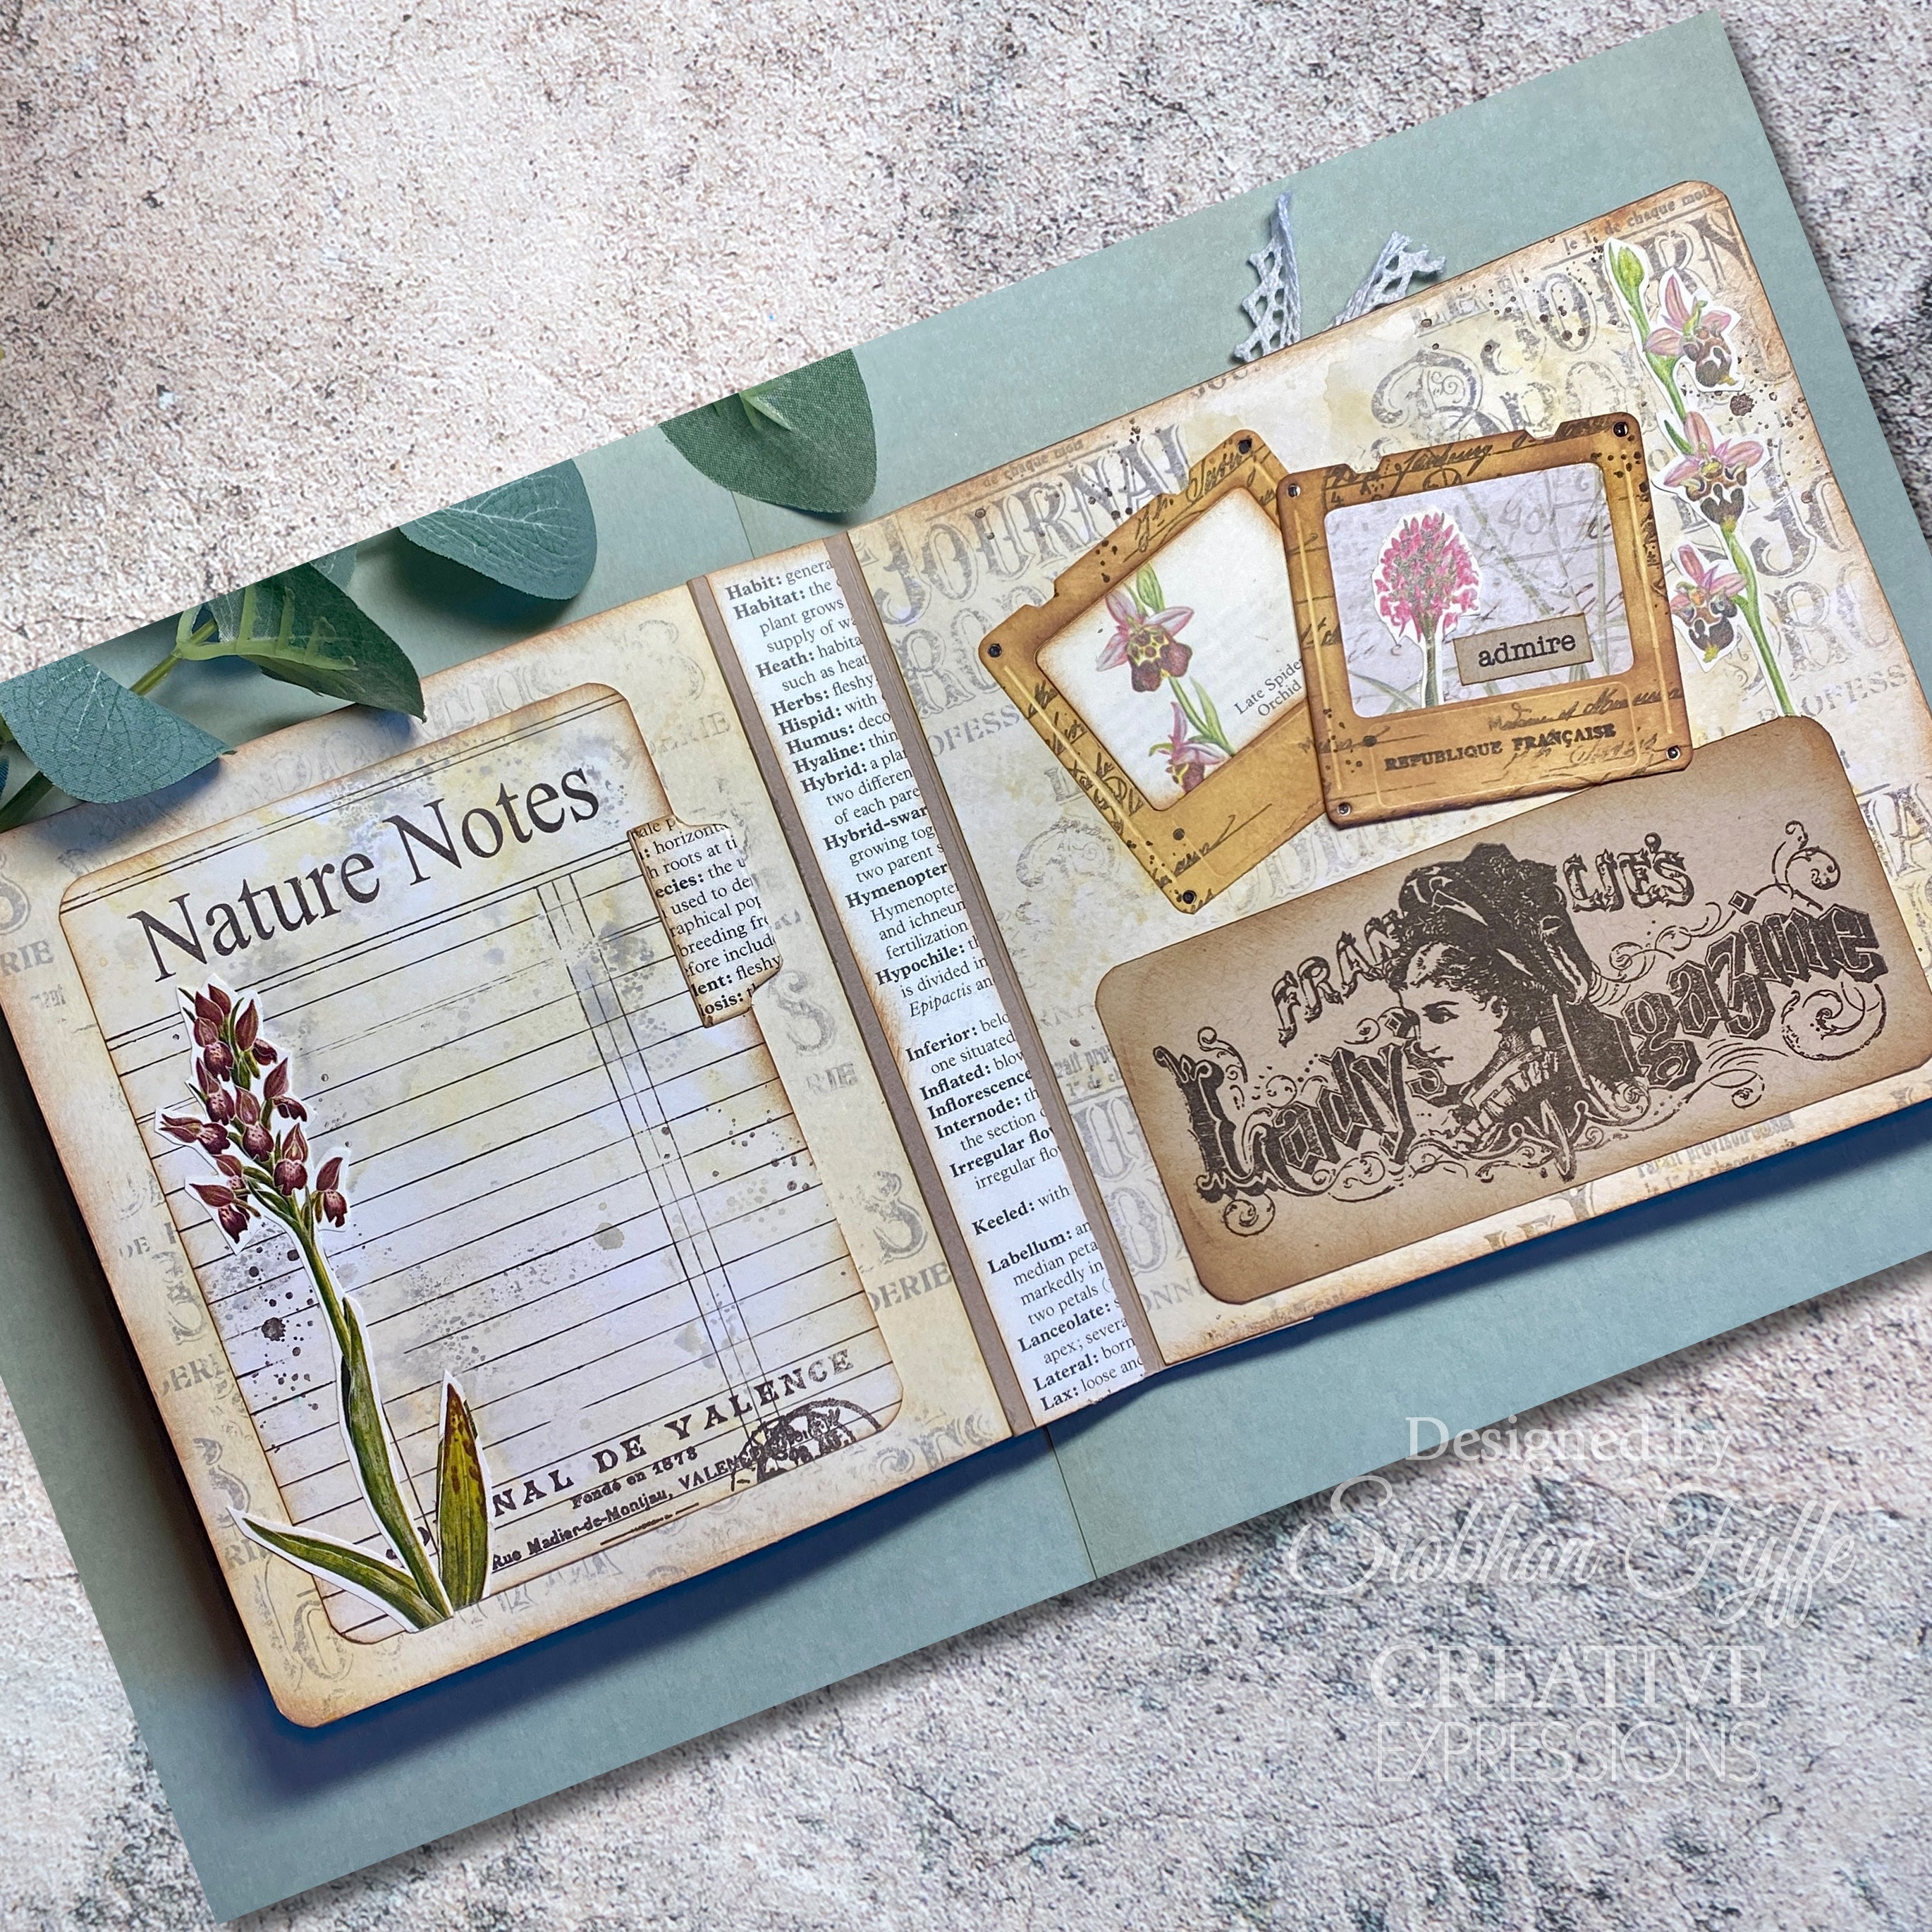 Creative Expressions Taylor Made Journals Carte Postale 6 in x 8 in Clear Stamp Set